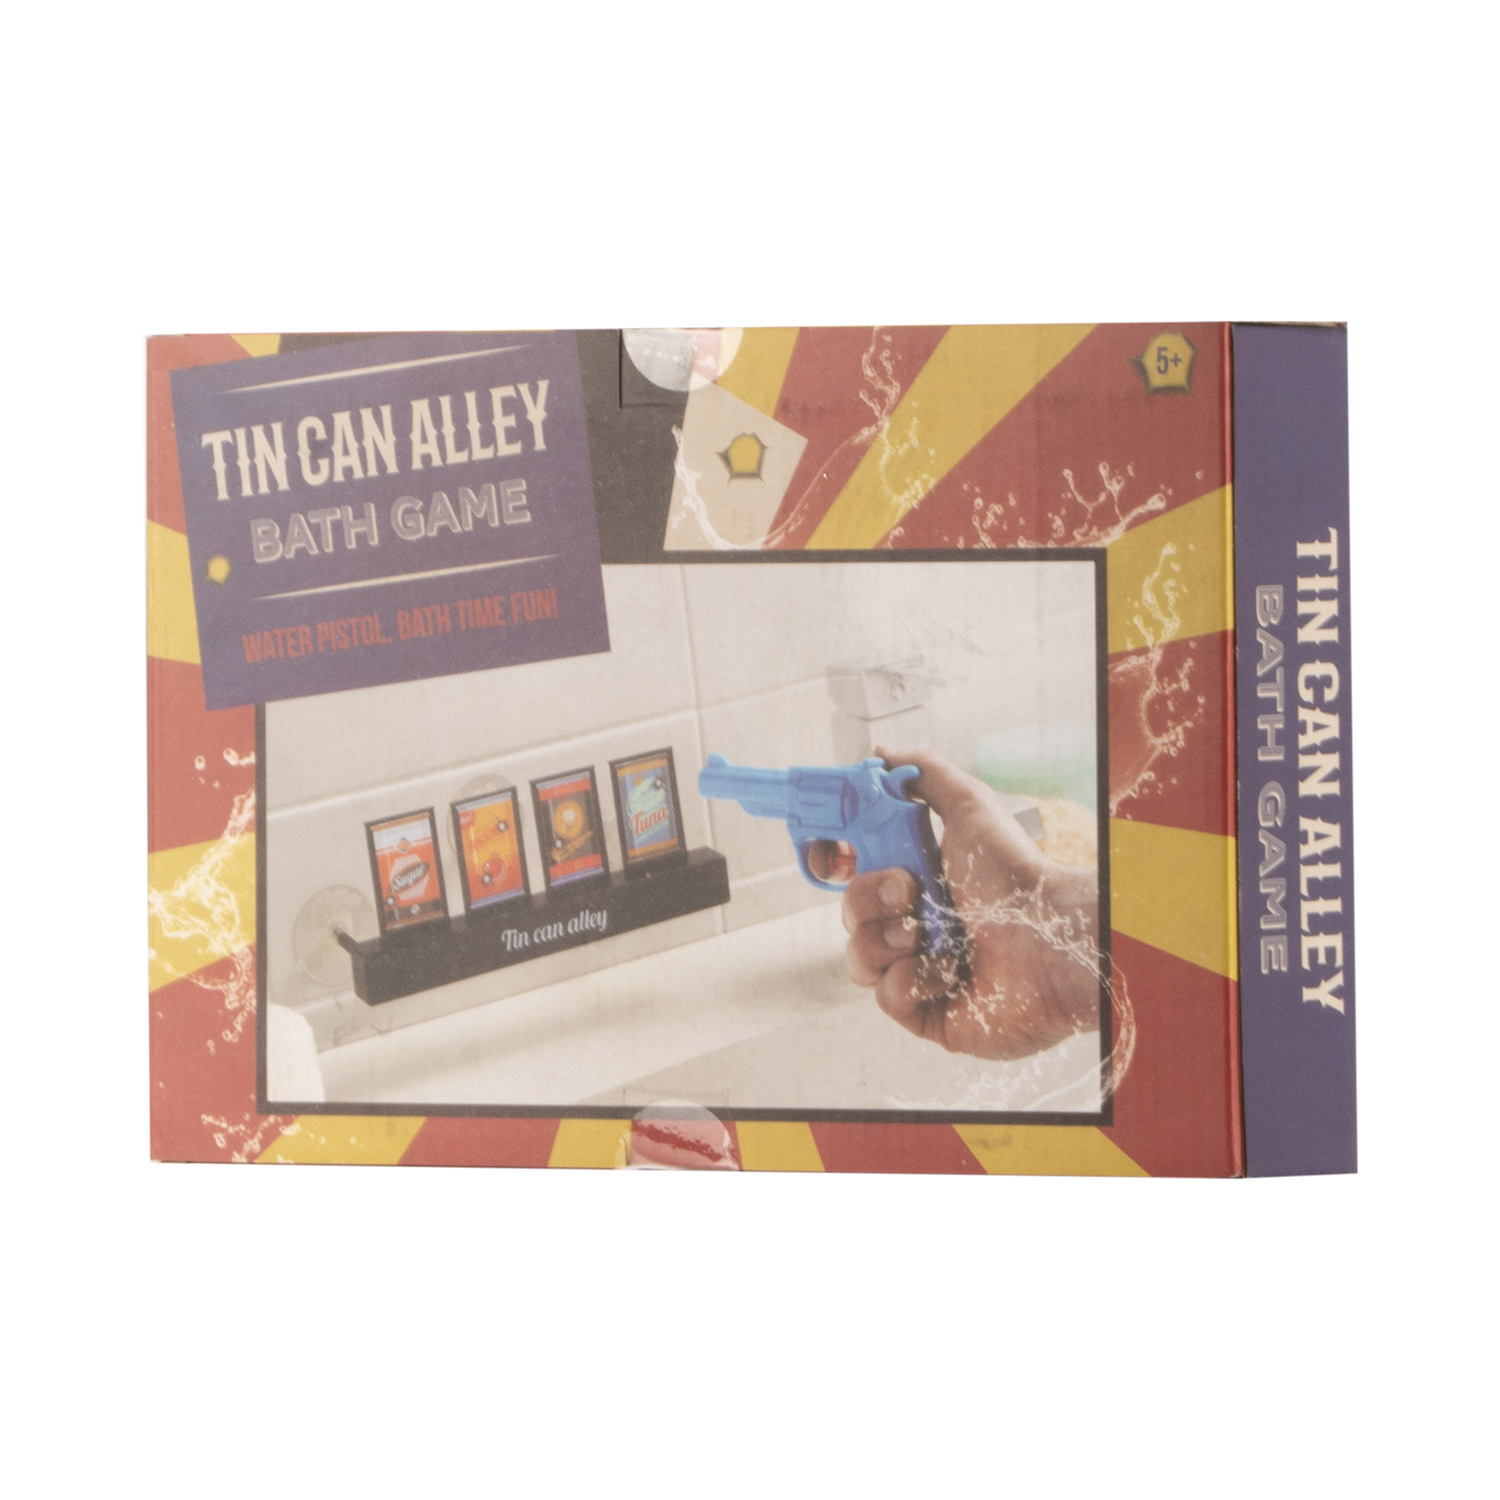 G&G Tin Can Alley Bath Game Image 2